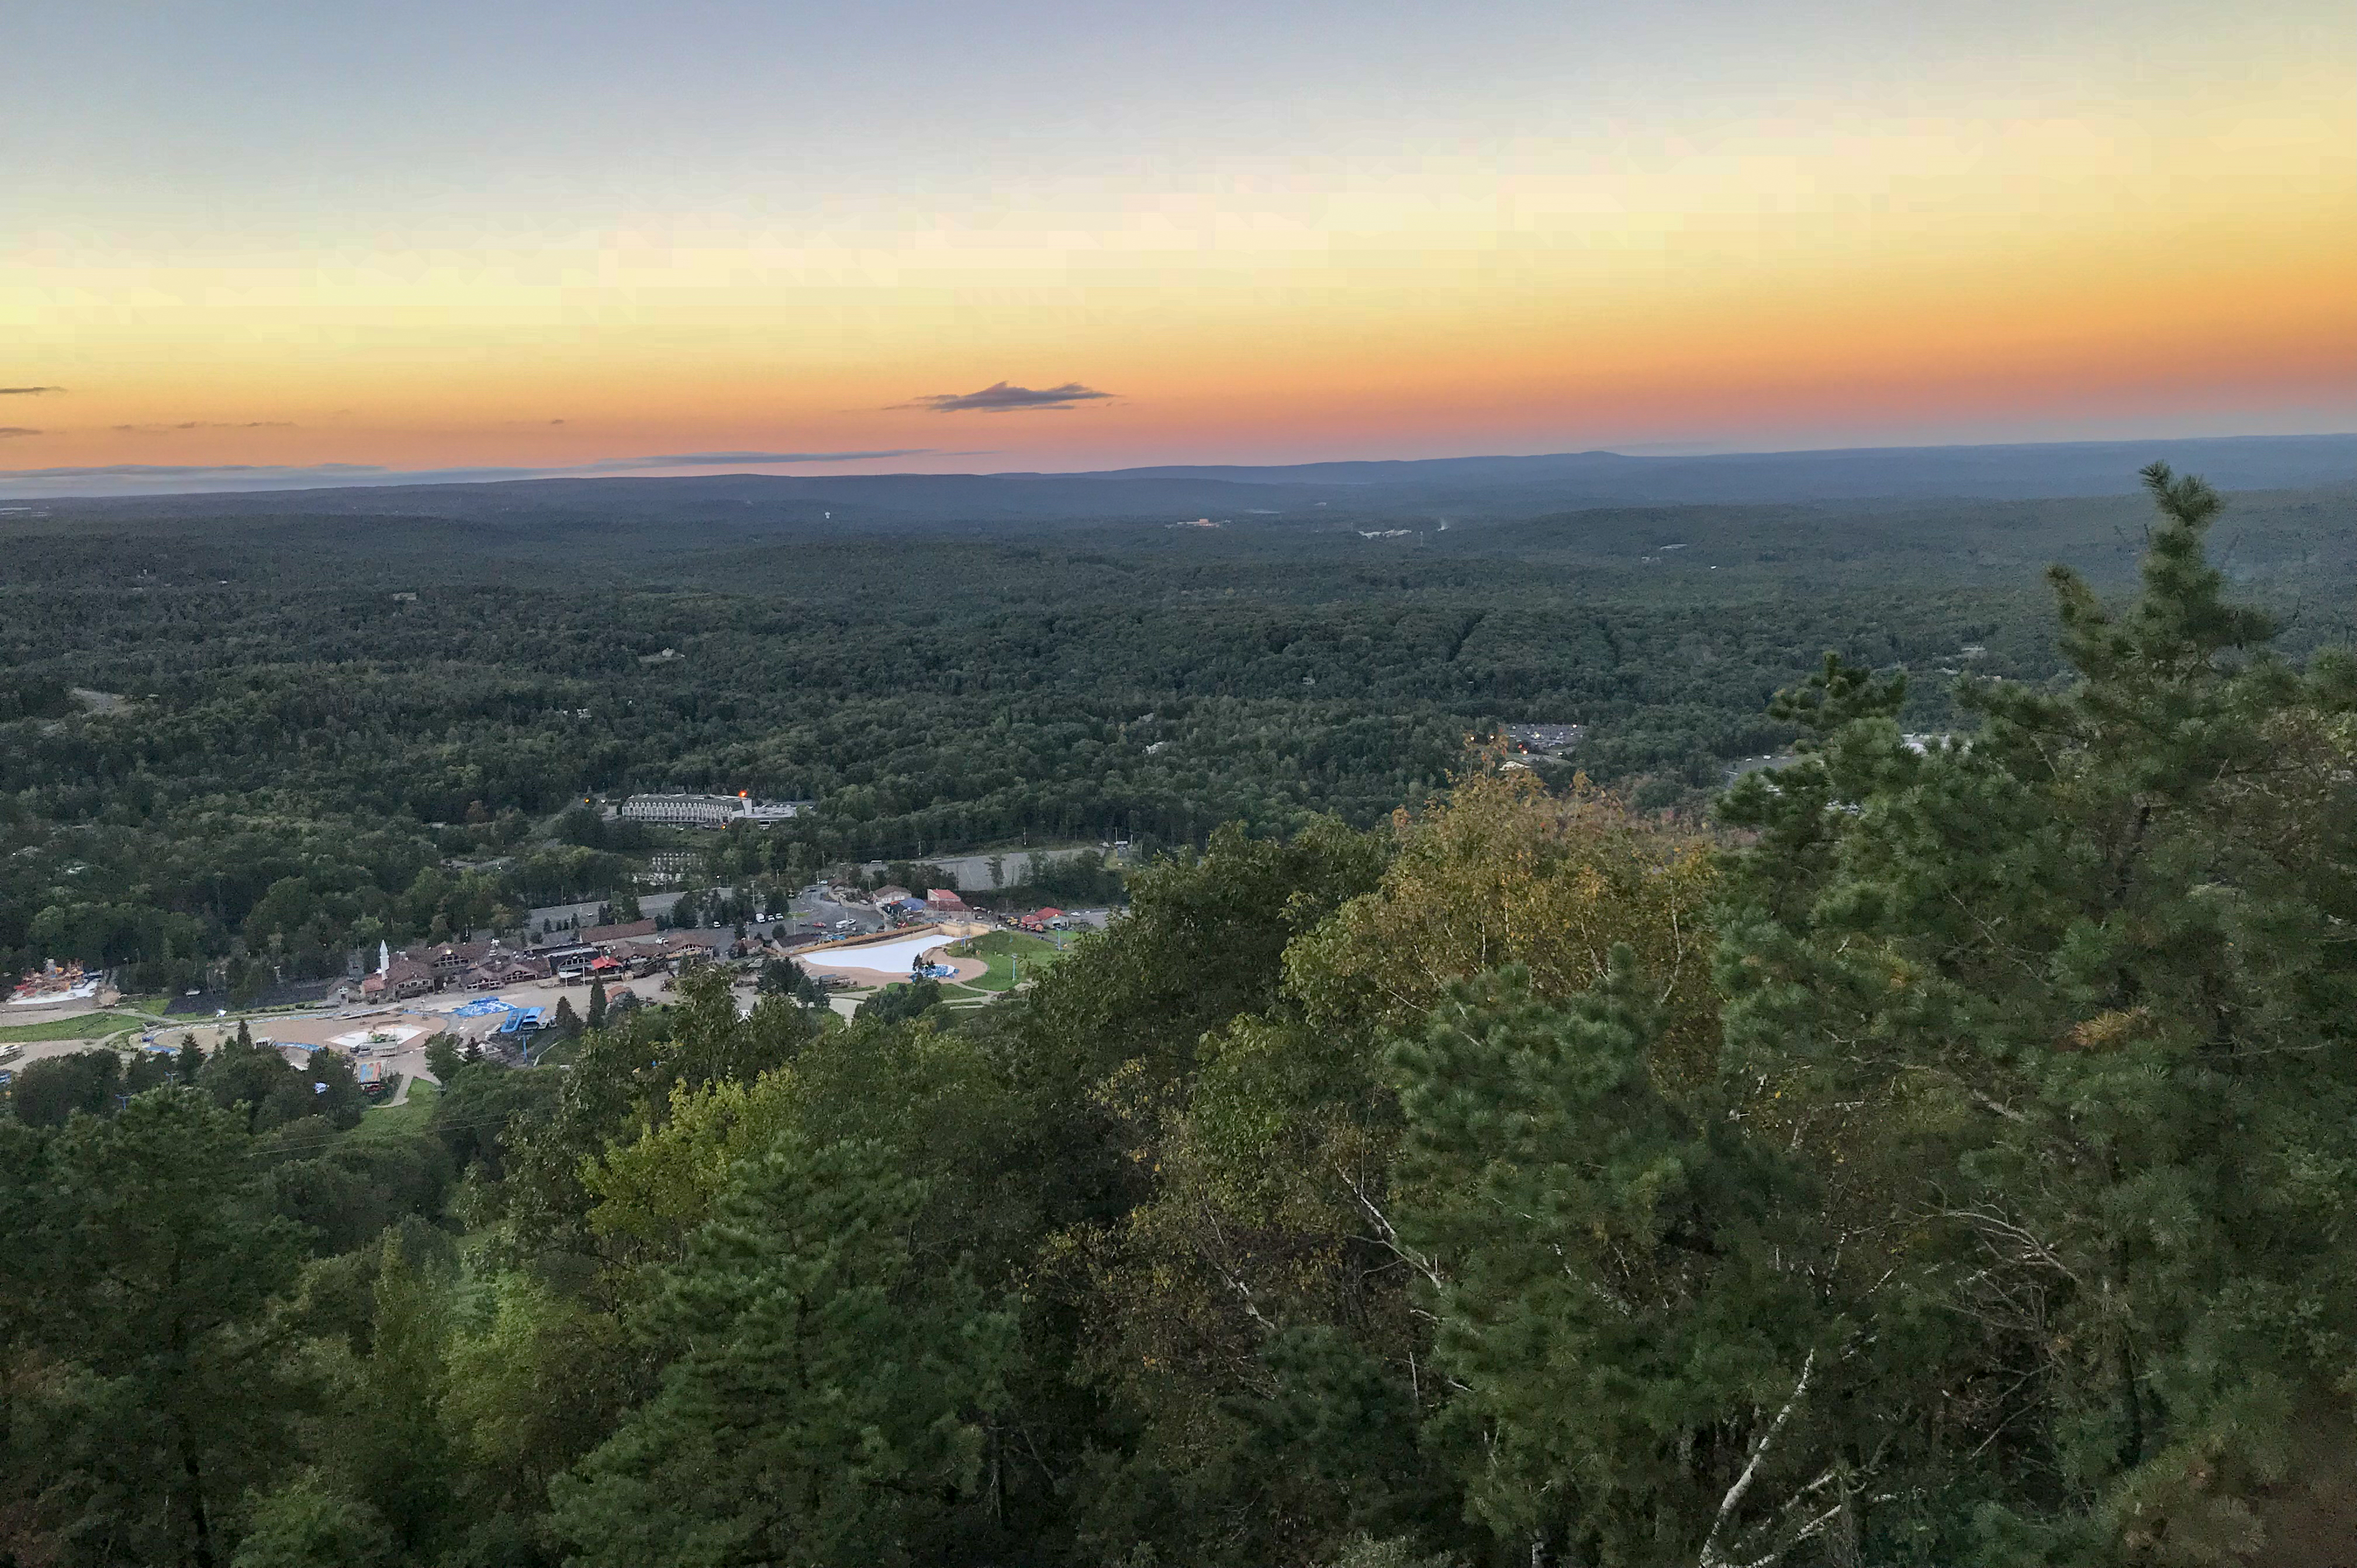 Looking for a great dinner in the Poconos? Want to have some Halloween fun in the Poconos? Check out Monster Mountain and More at Camelback in the Poconos #Poconos #FamilyFun #Halloween